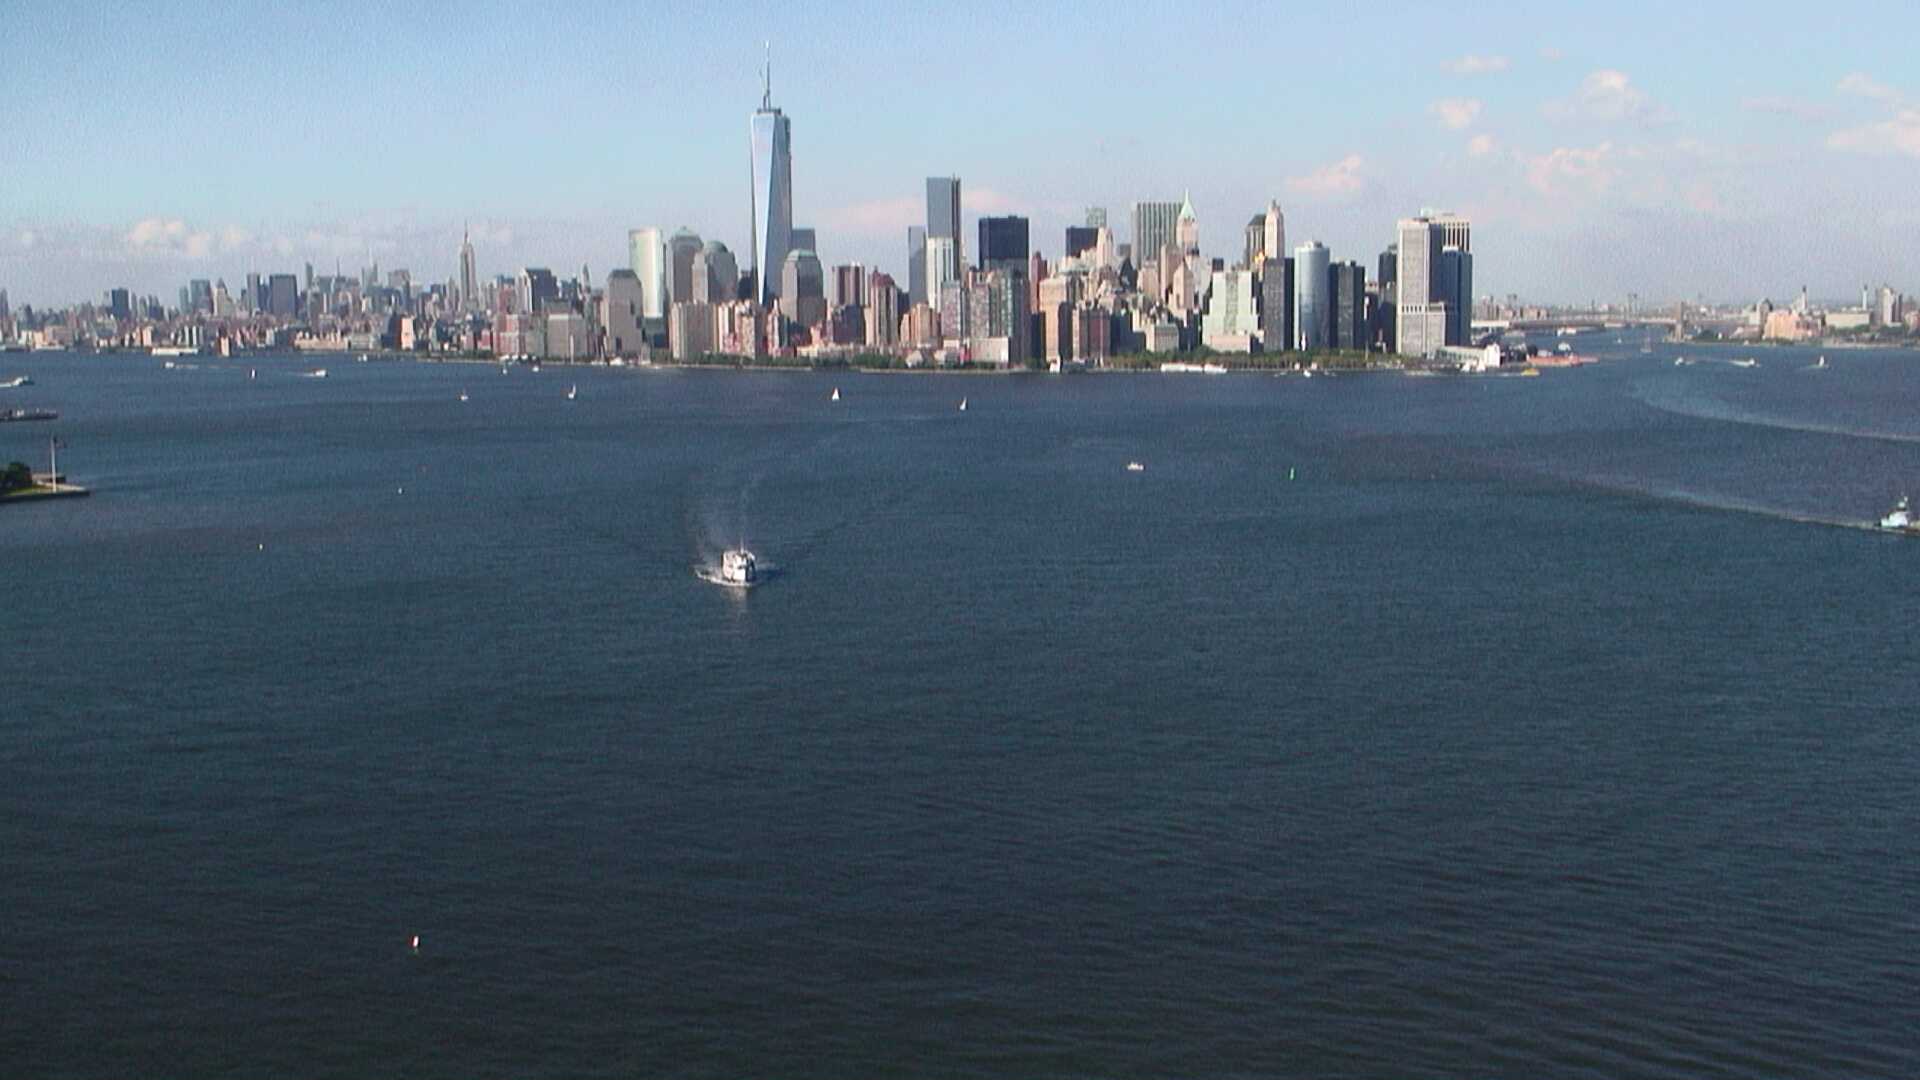 EarthCam's HarborCam delivers uninterrupted live views and sounds of the New York Harbor